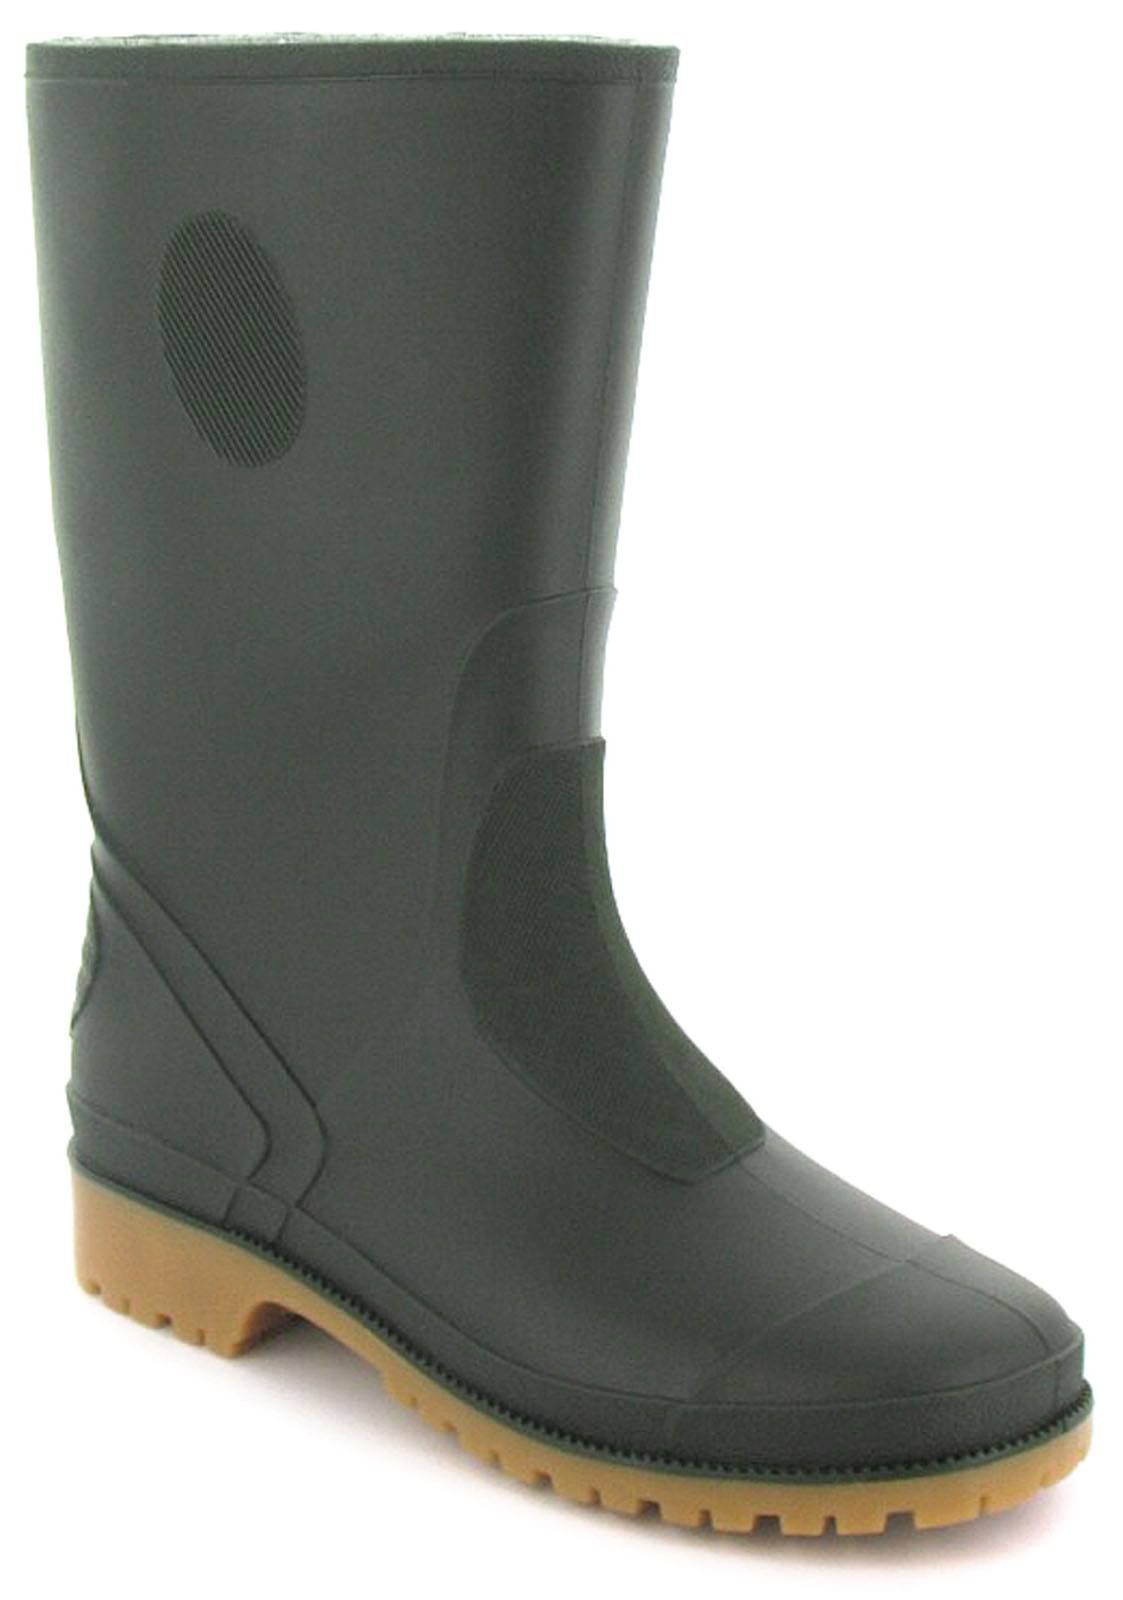 New Boys/Childrens Green Pvc Long Leg Wellington Boots. Manmade Upper. Fabric Lining. Synthetic Sole. Kids Childs Green Wellies Wellys Outdoors Rain Boots Wet.